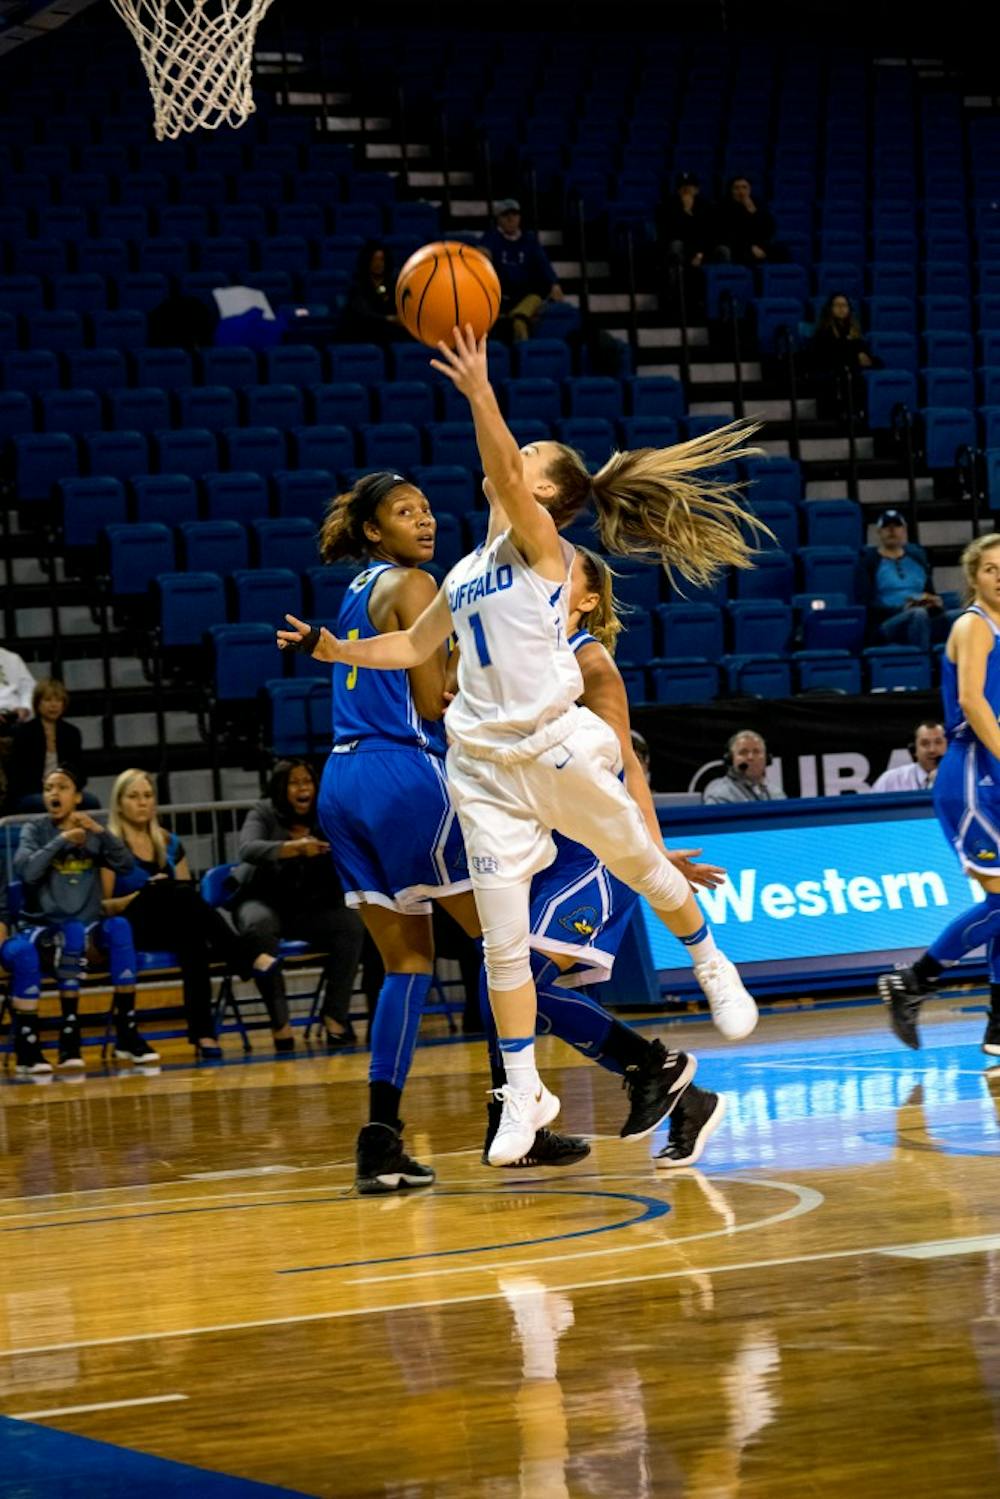 <p>Senior guard Stephanie Reid comes in for the layup. Reid is coming off a strong performance in the Bulls' win on Saturday.</p>